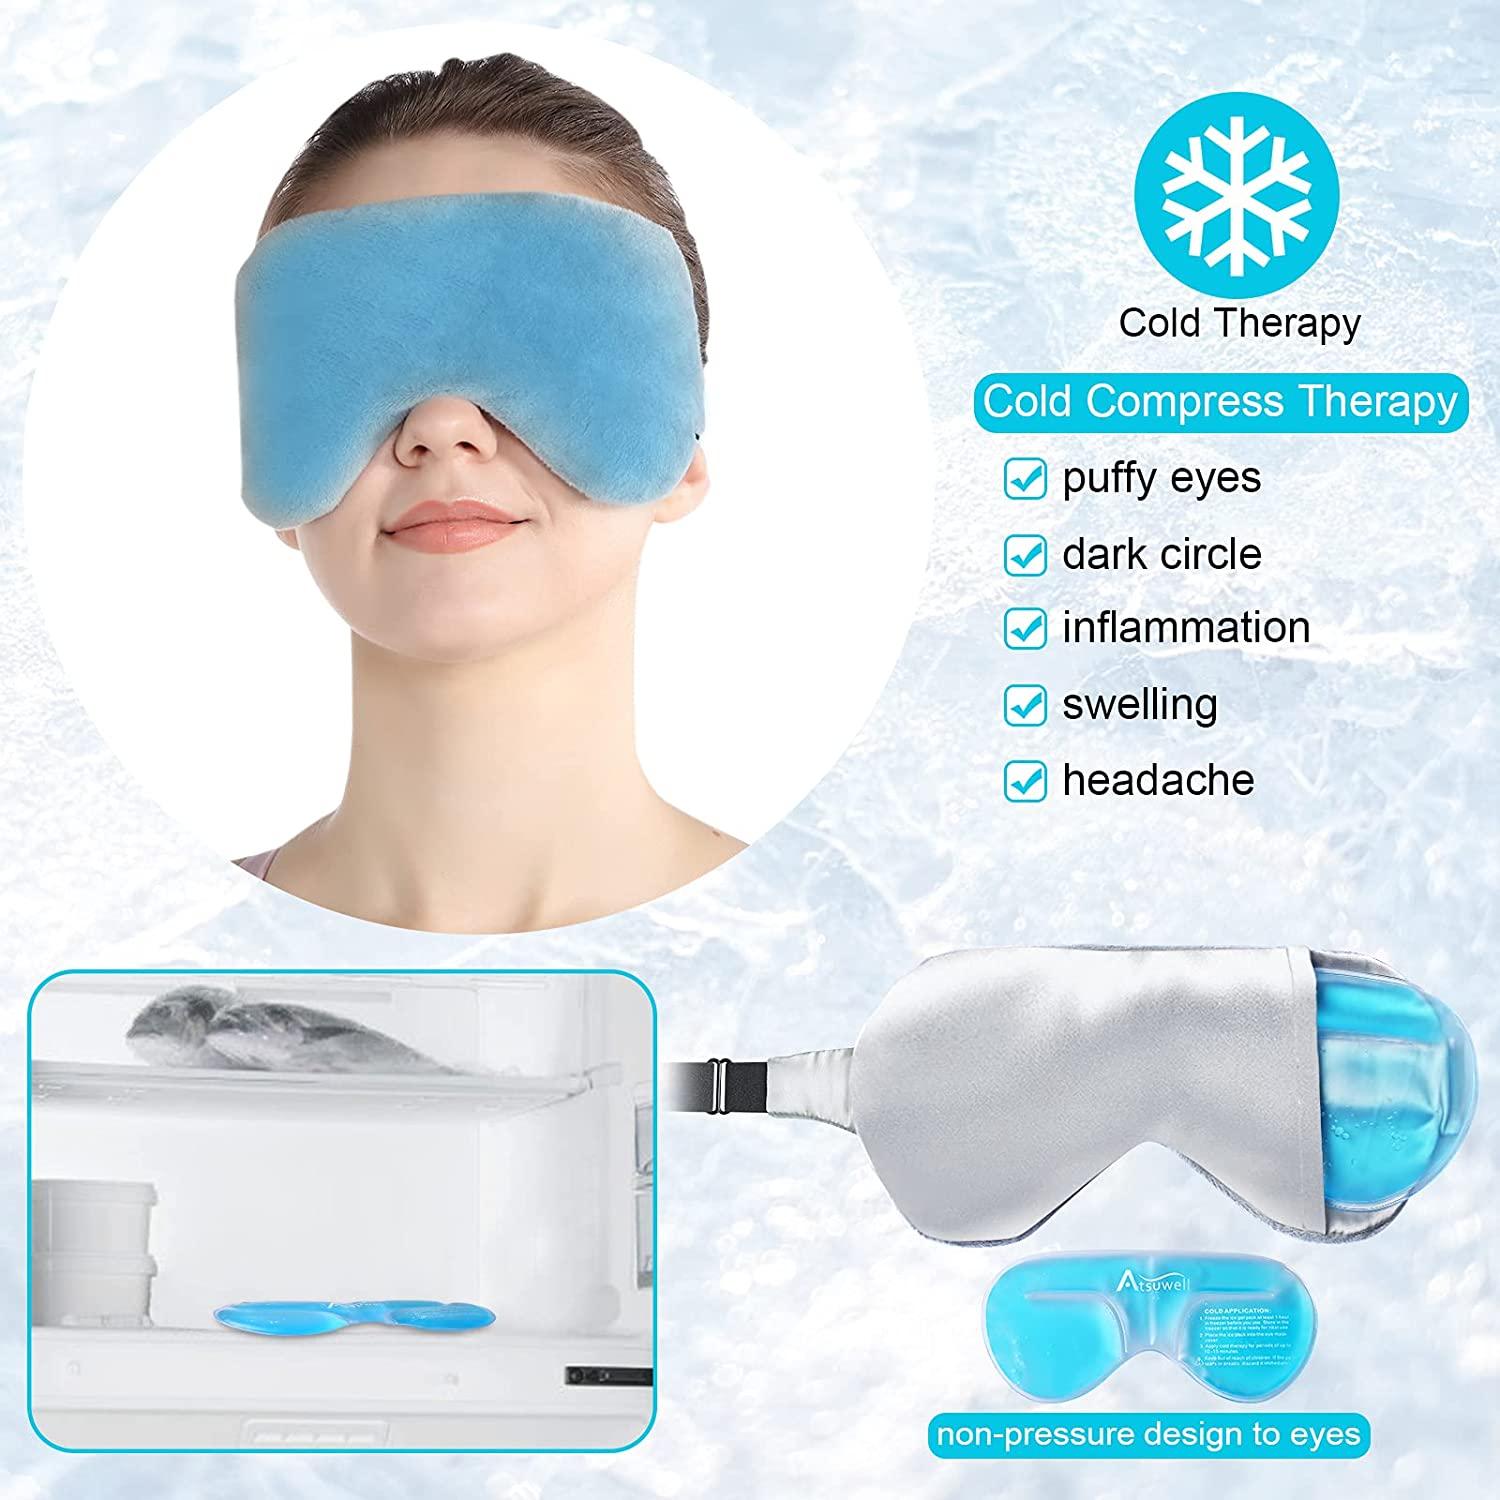 Atsuwell Eye Compress Moist Heat and Cold Therapy Sleep Eye Mask for Dry  Eyes, Stye, Puffy, Migraine, Fatigue Relief, Multipurpose Eye Pillow  Microwavable with Bonus Gel Pad and Silky Insert Gray